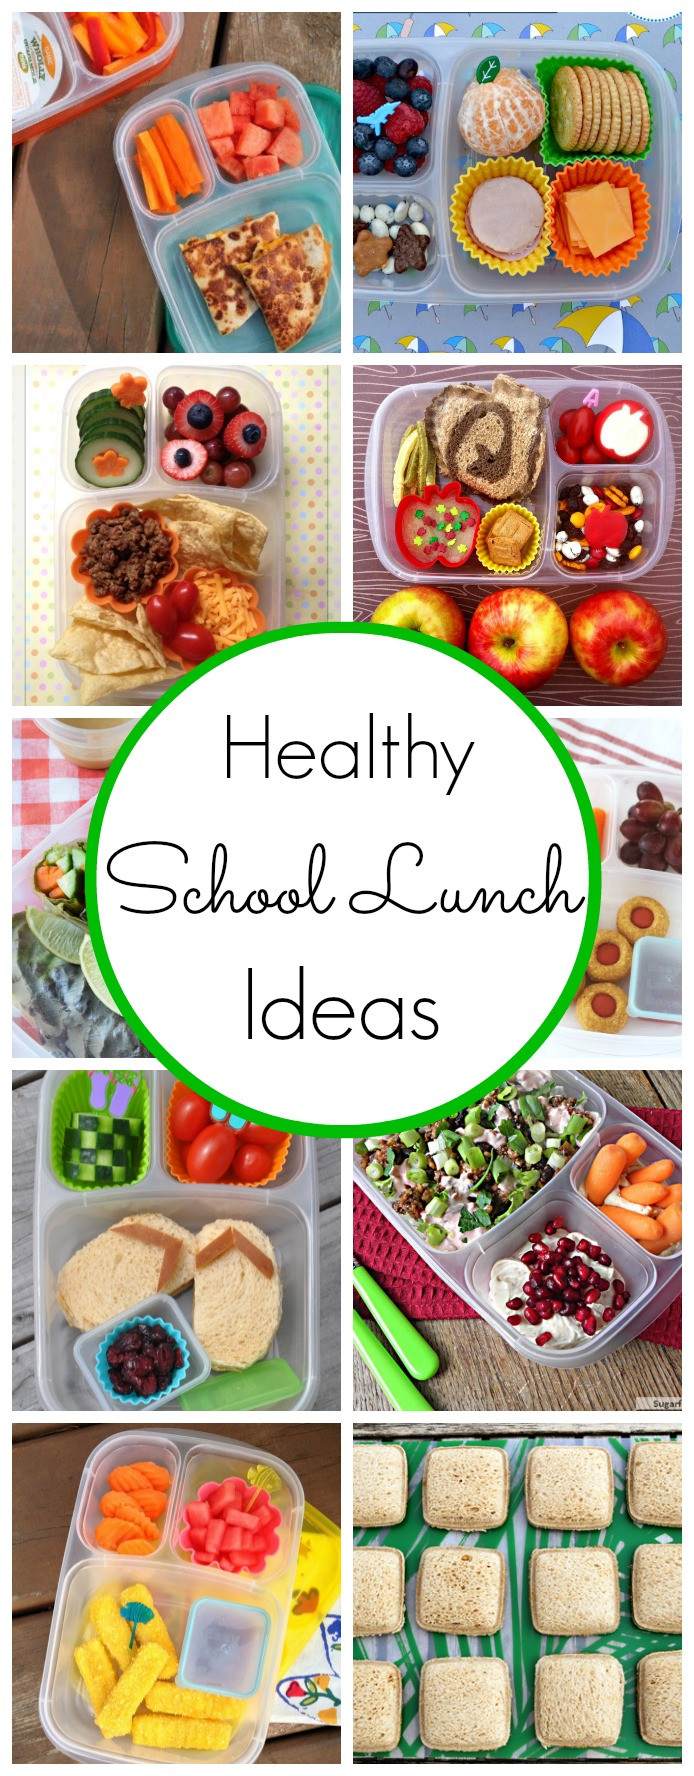 Are School Lunches Healthy
 Healthy School Lunch Ideas